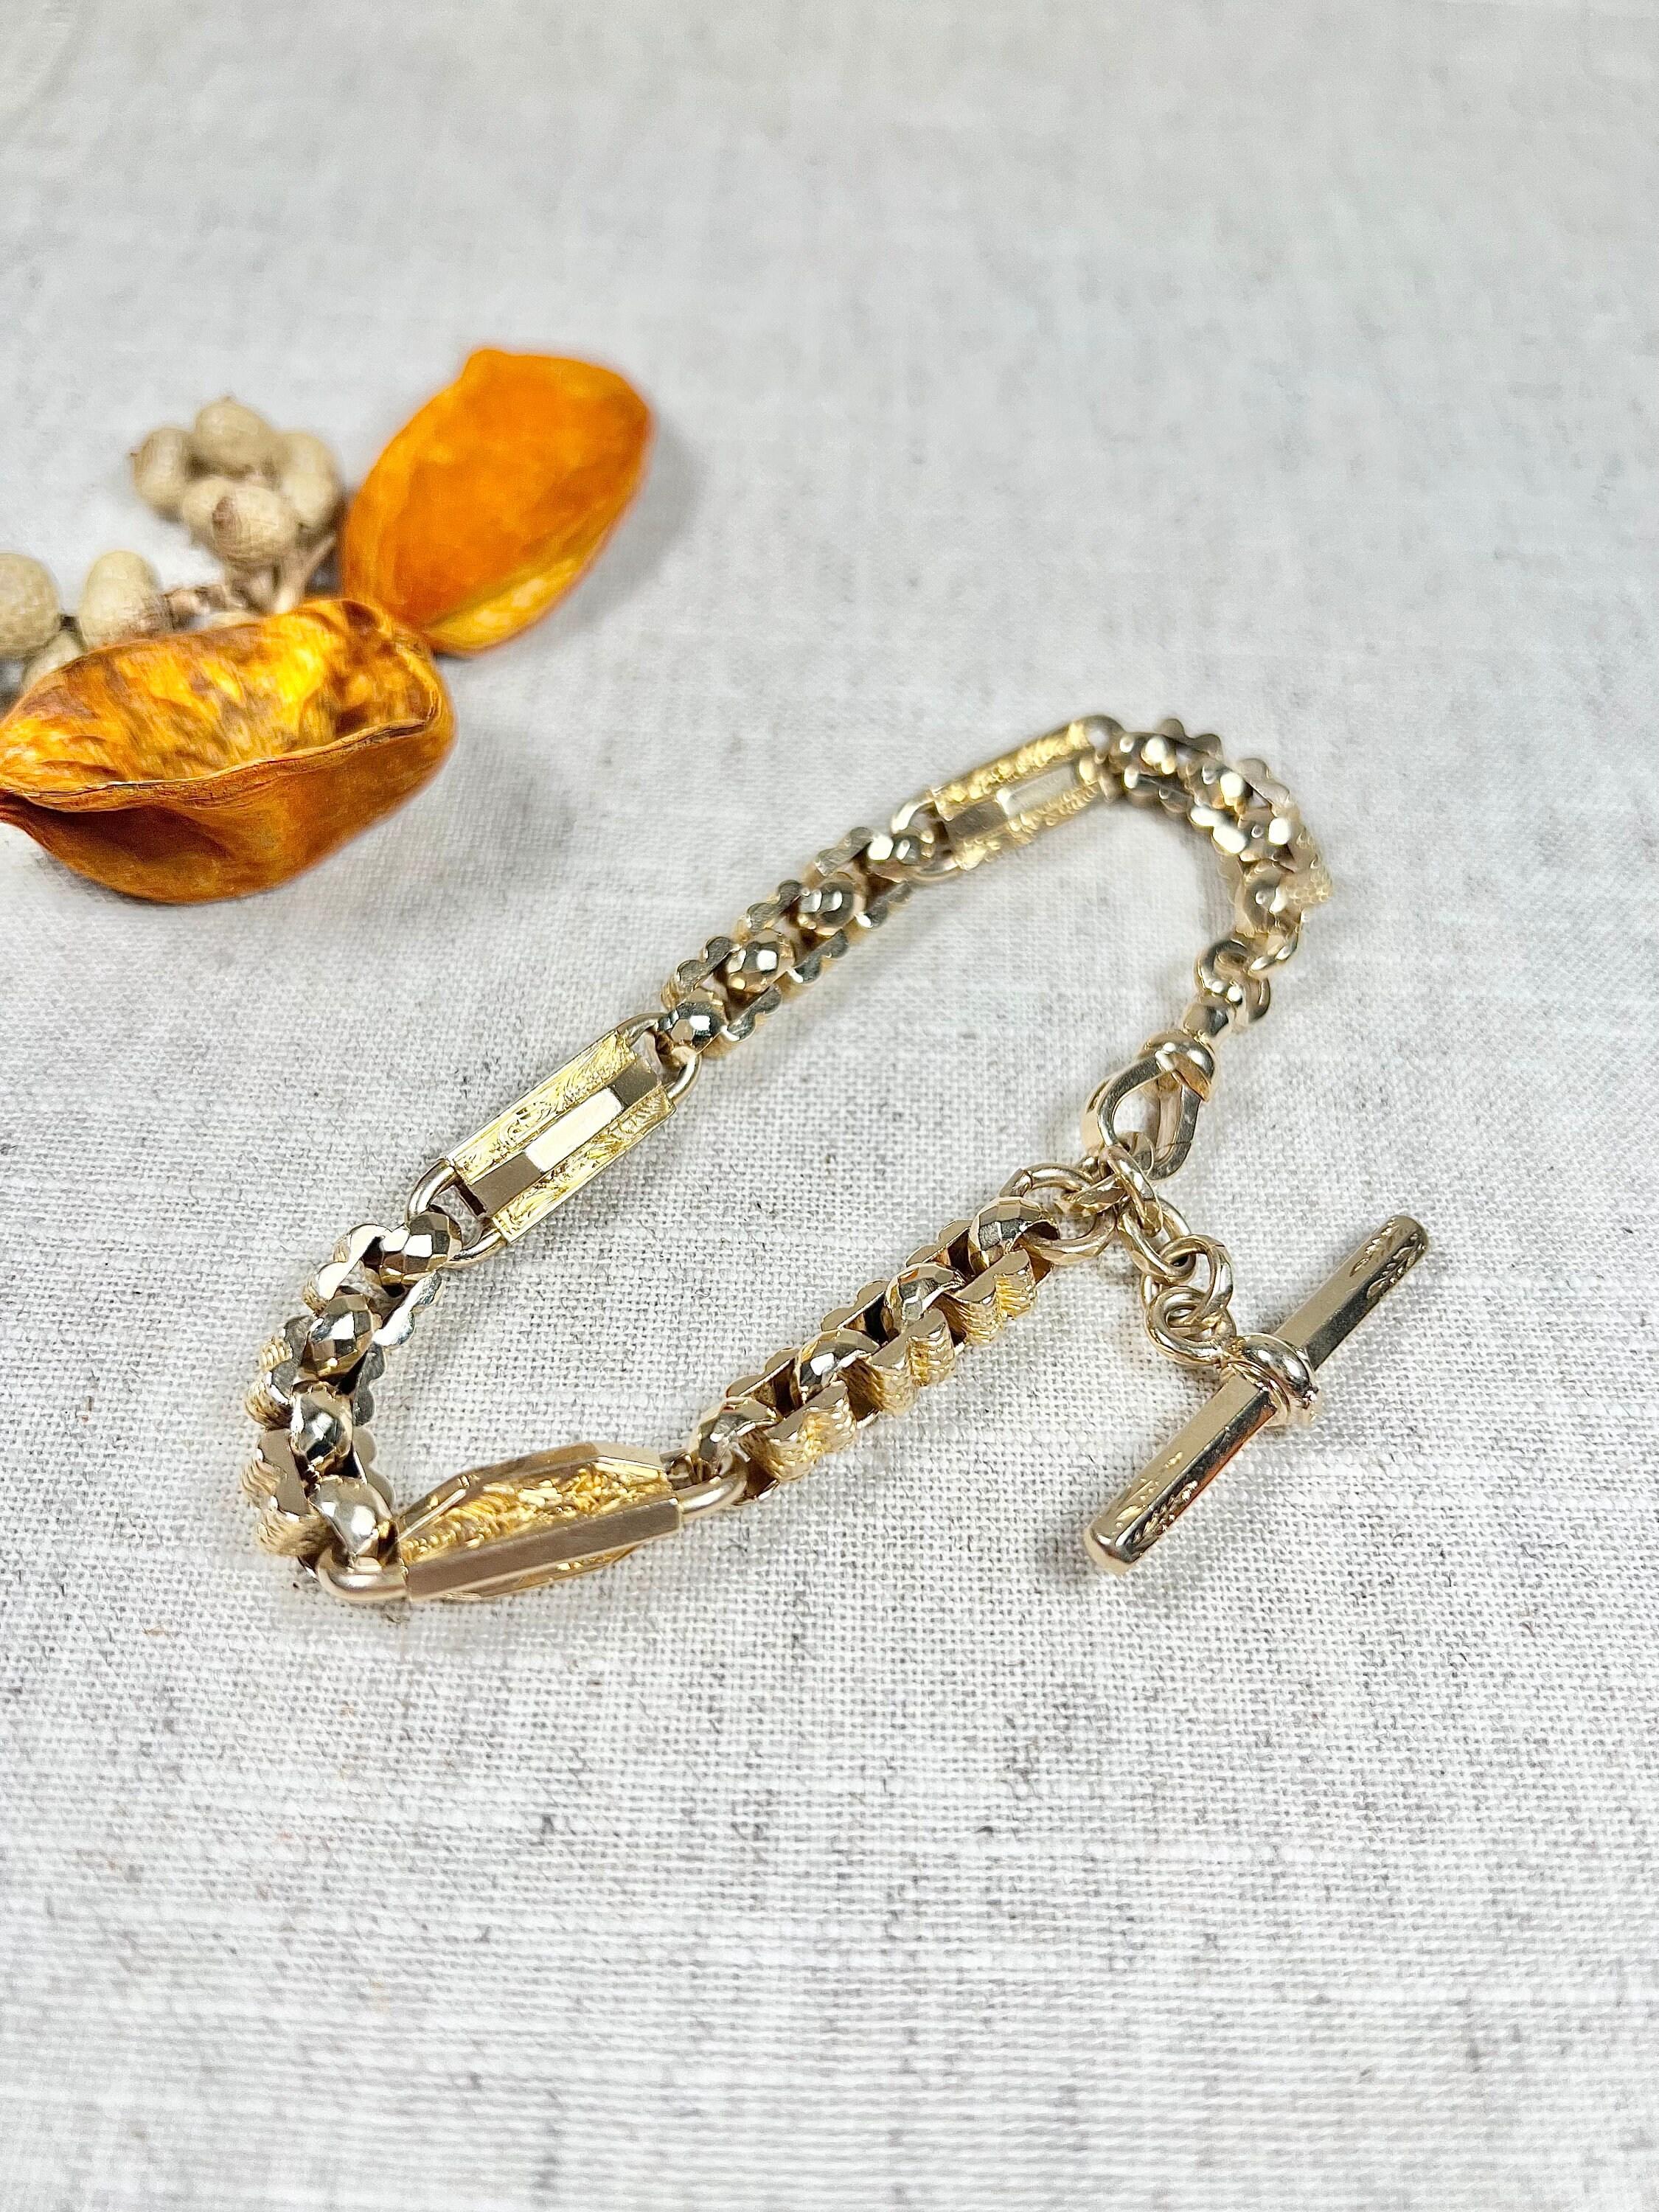 Antique Albert Bracelet 

9ct Yellow Gold Stamped

Circa 1880

Makers Mark Mc C & C

This exquisite 9ct yellow gold Albert bracelet is a true masterpiece. Featuring a beautiful set of elongated engraved links and square links, this fancy link